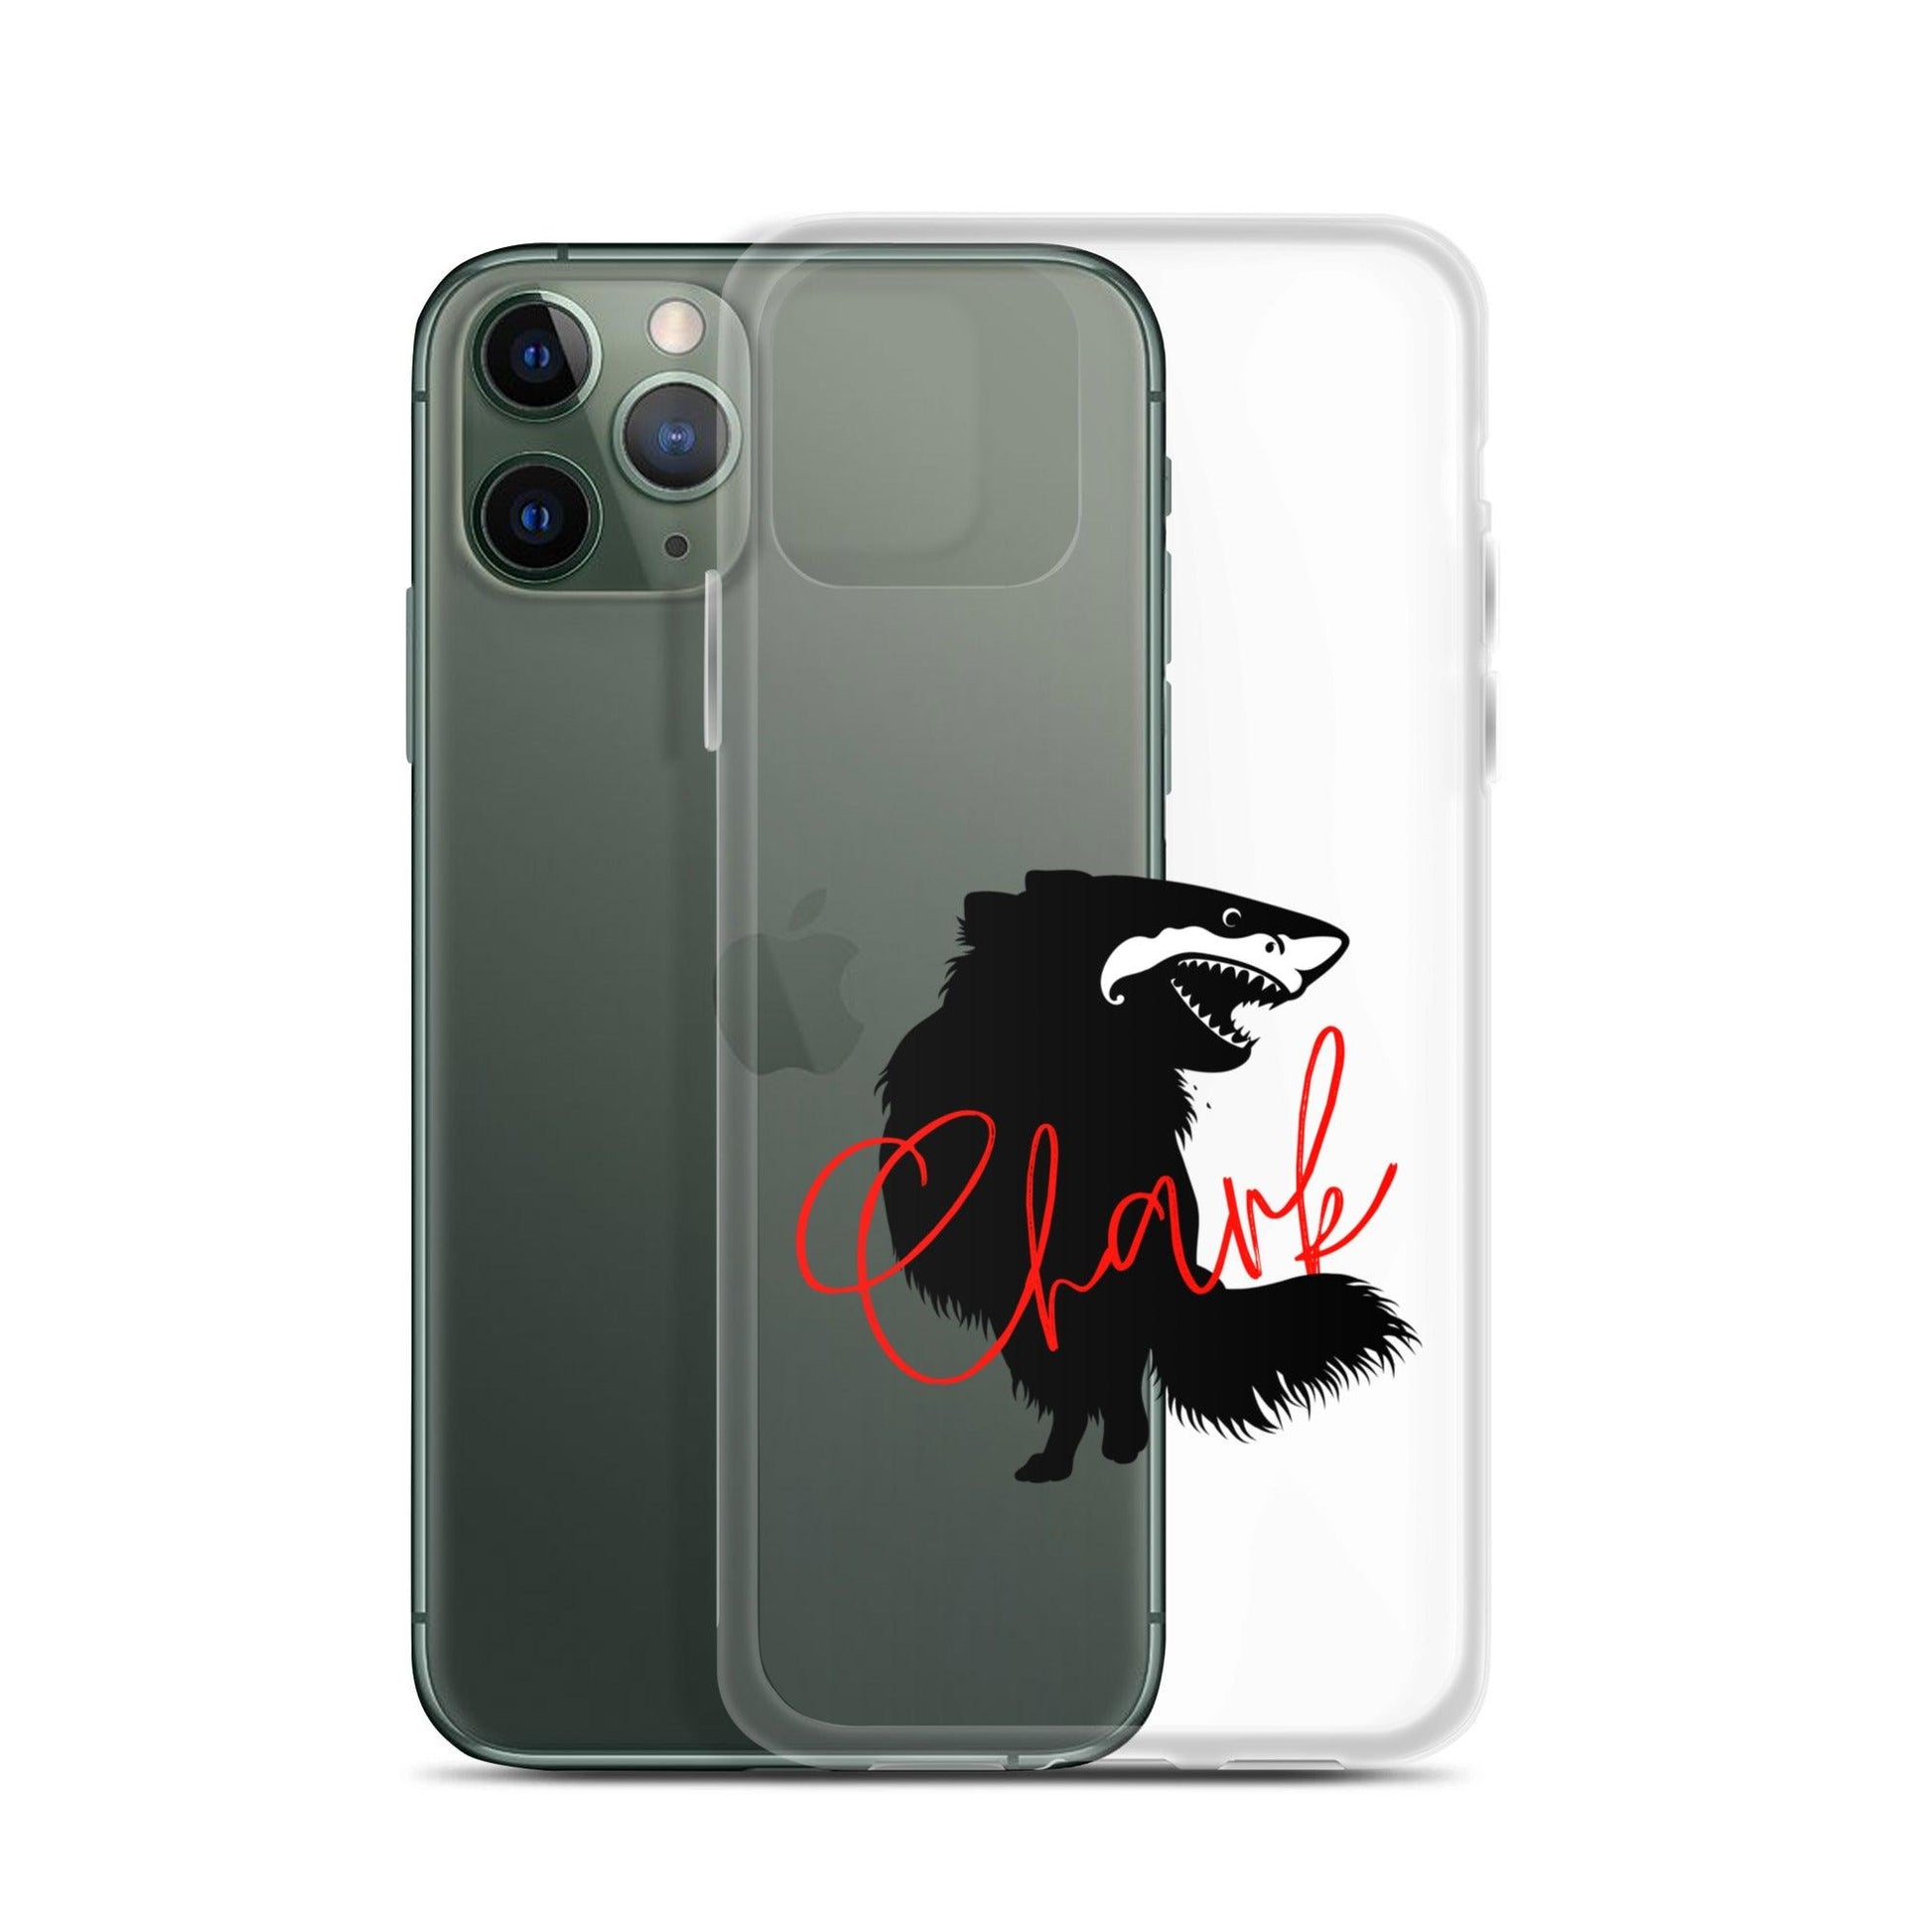 Chihuahua + Shark = Chark Clear iPhone case with the black silhouette of a longhaired chihuahua with the face of a great white shark - mouth open to show off jaws lined with lots of sharp white teeth. The word "Chark" is artfully placed in red cursive font over the image. For trendy chi lovers. iPhone 11 pro case.